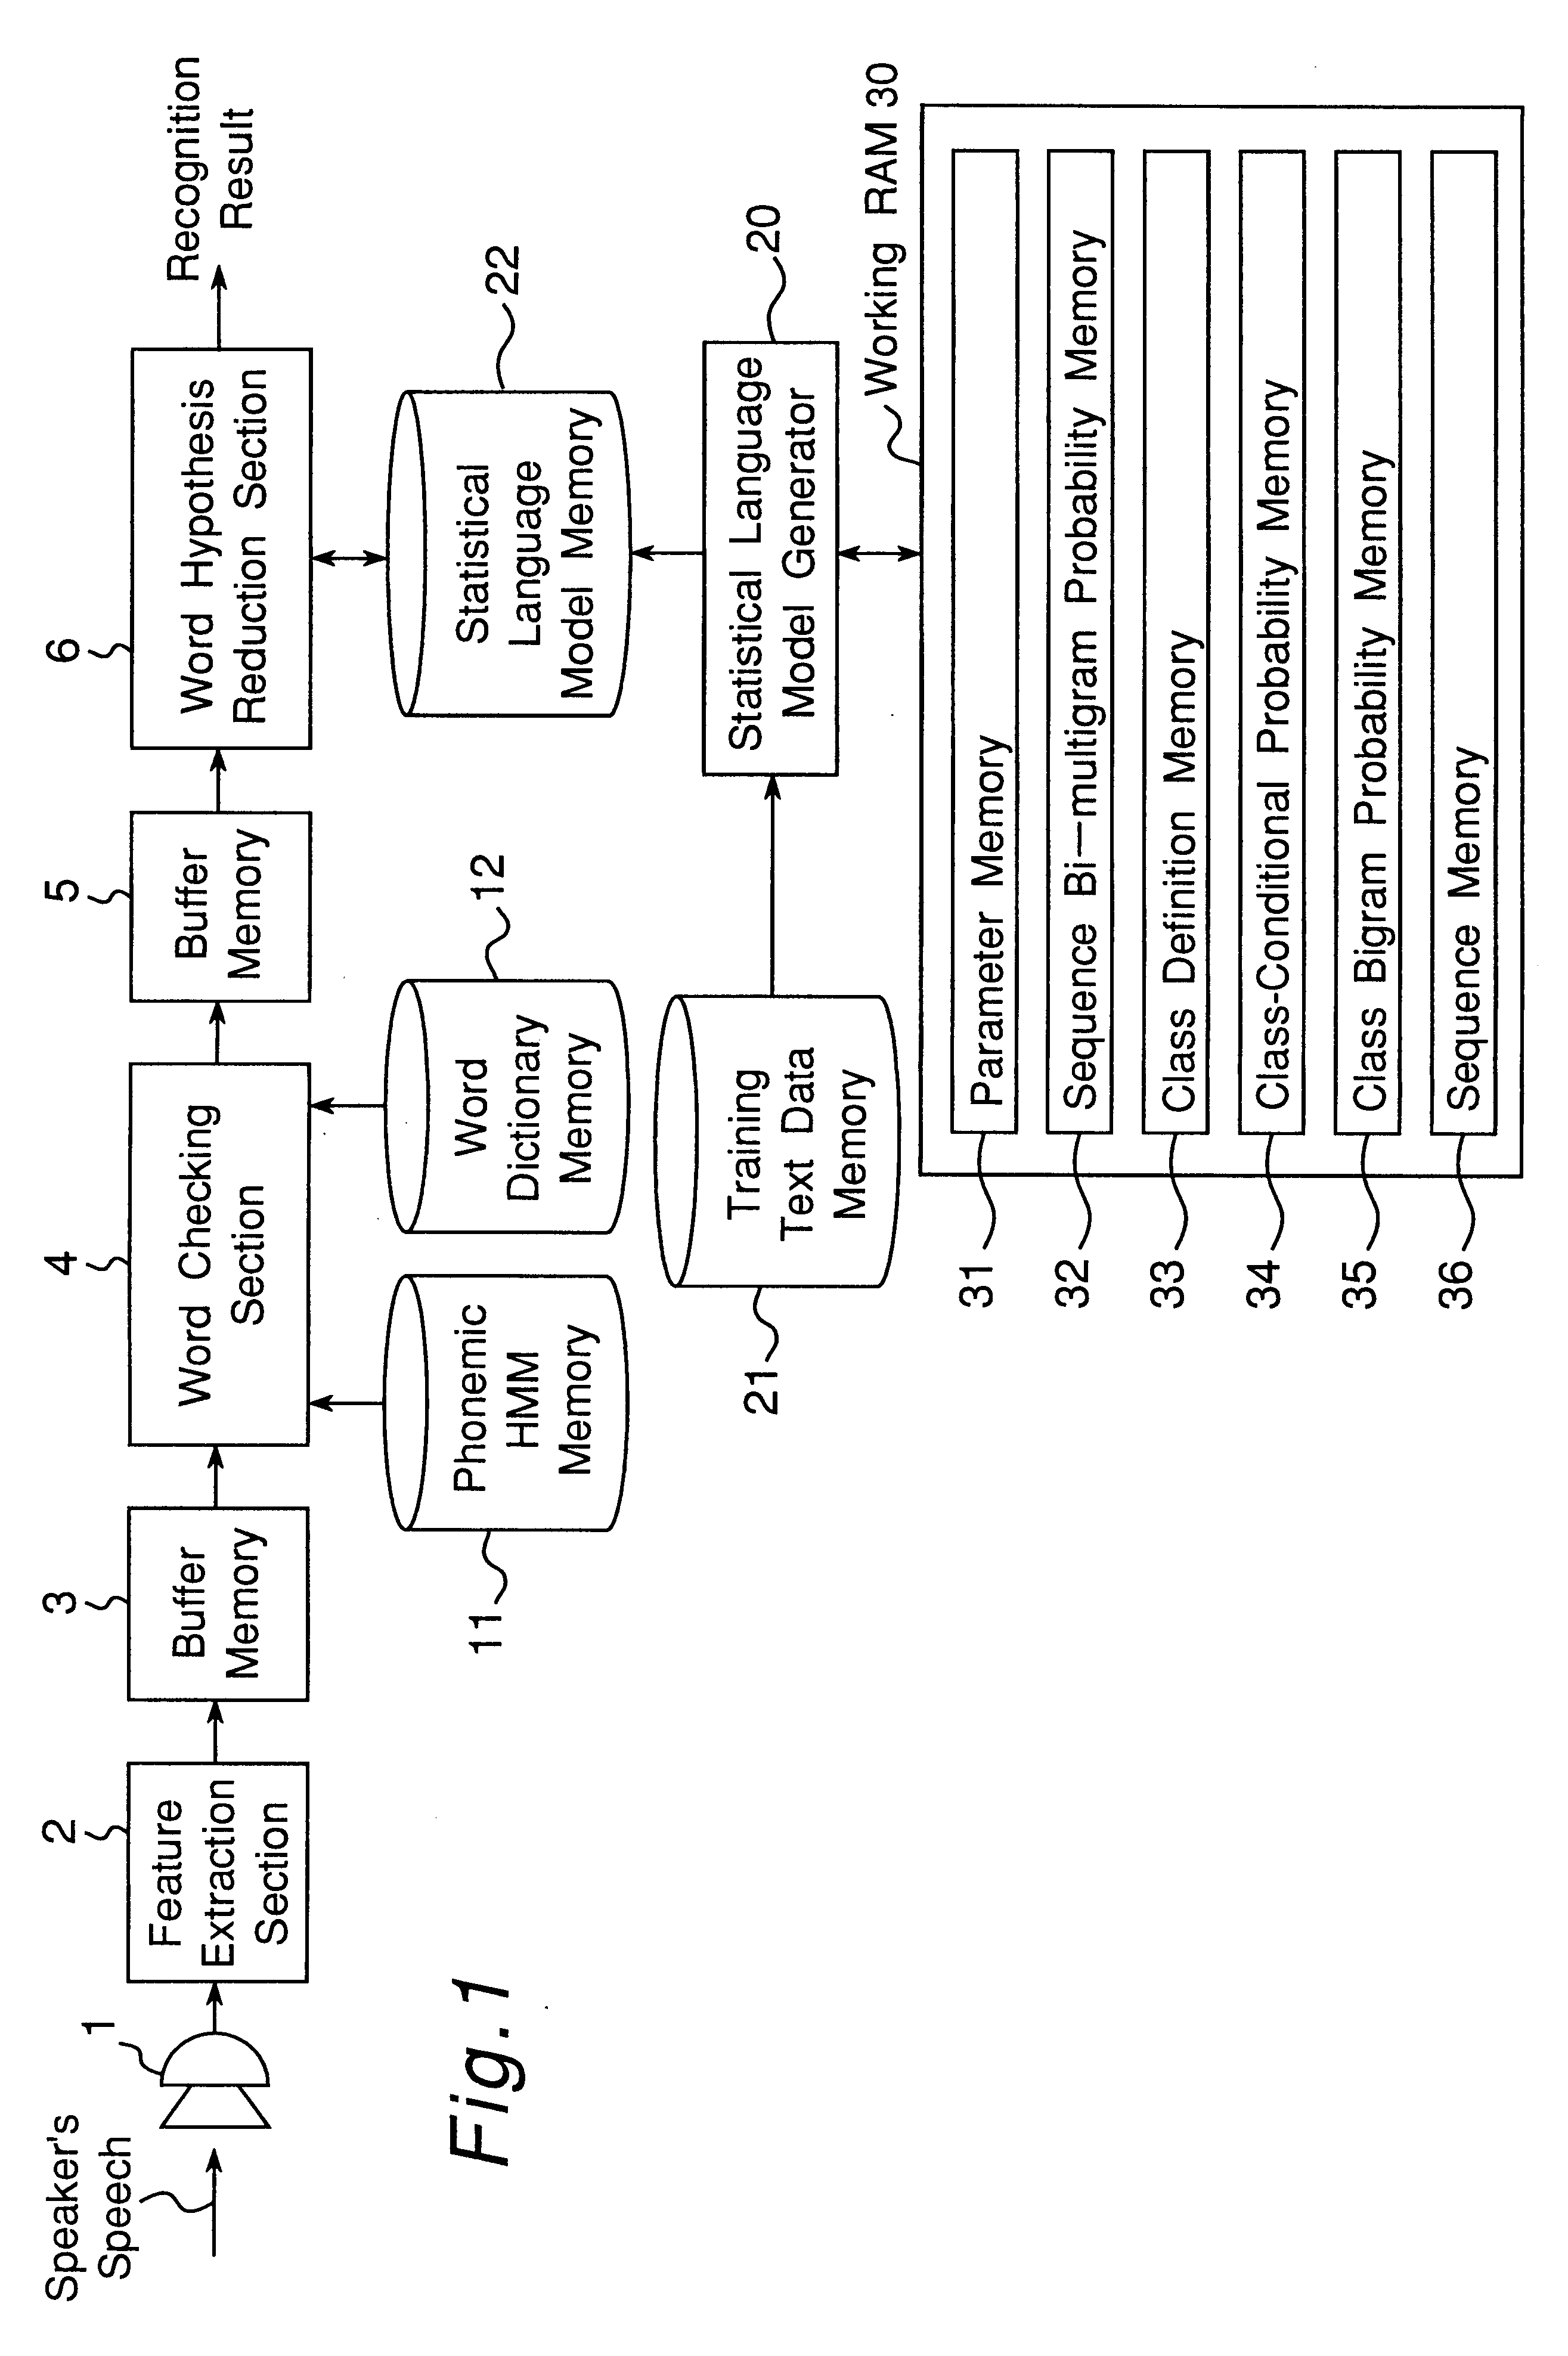 Apparatus for generating a statistical sequence model called class bi-multigram model with bigram dependencies assumed between adjacent sequences